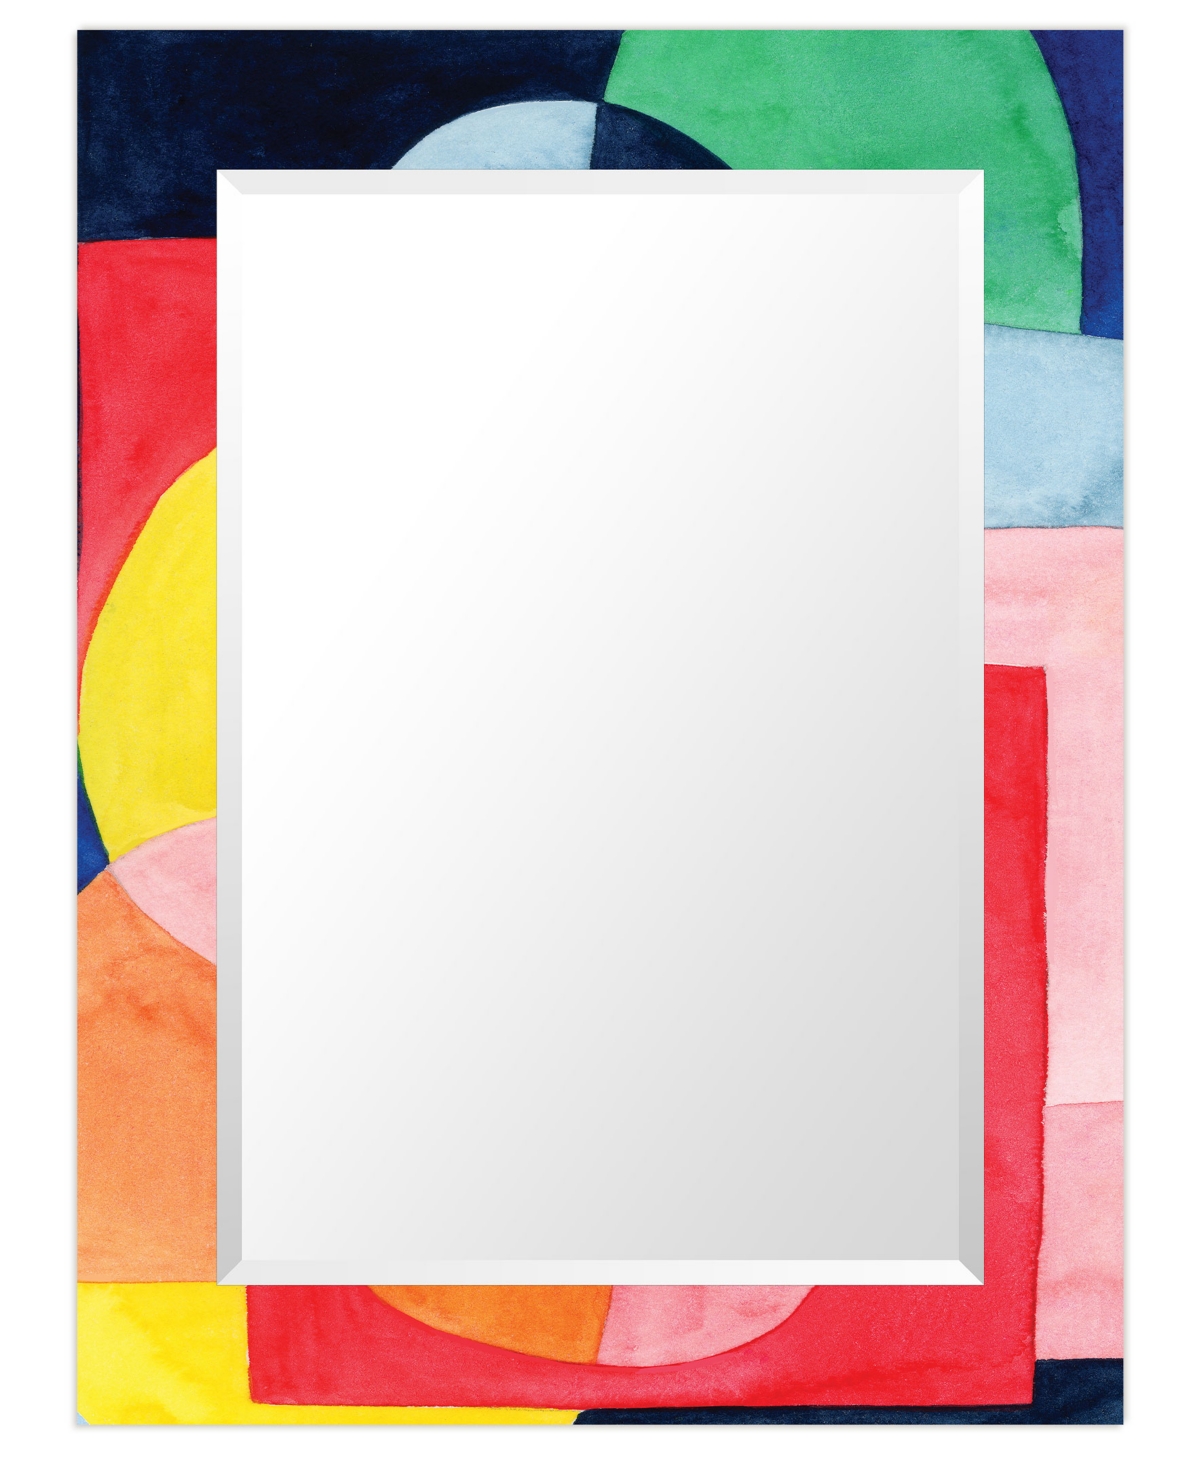 Empire Art Direct "pop Perpetuity I" Rectangular Beveled Mirror On Free Floating Printed Tempered Art Glass, 30" X 40" In Multi-color